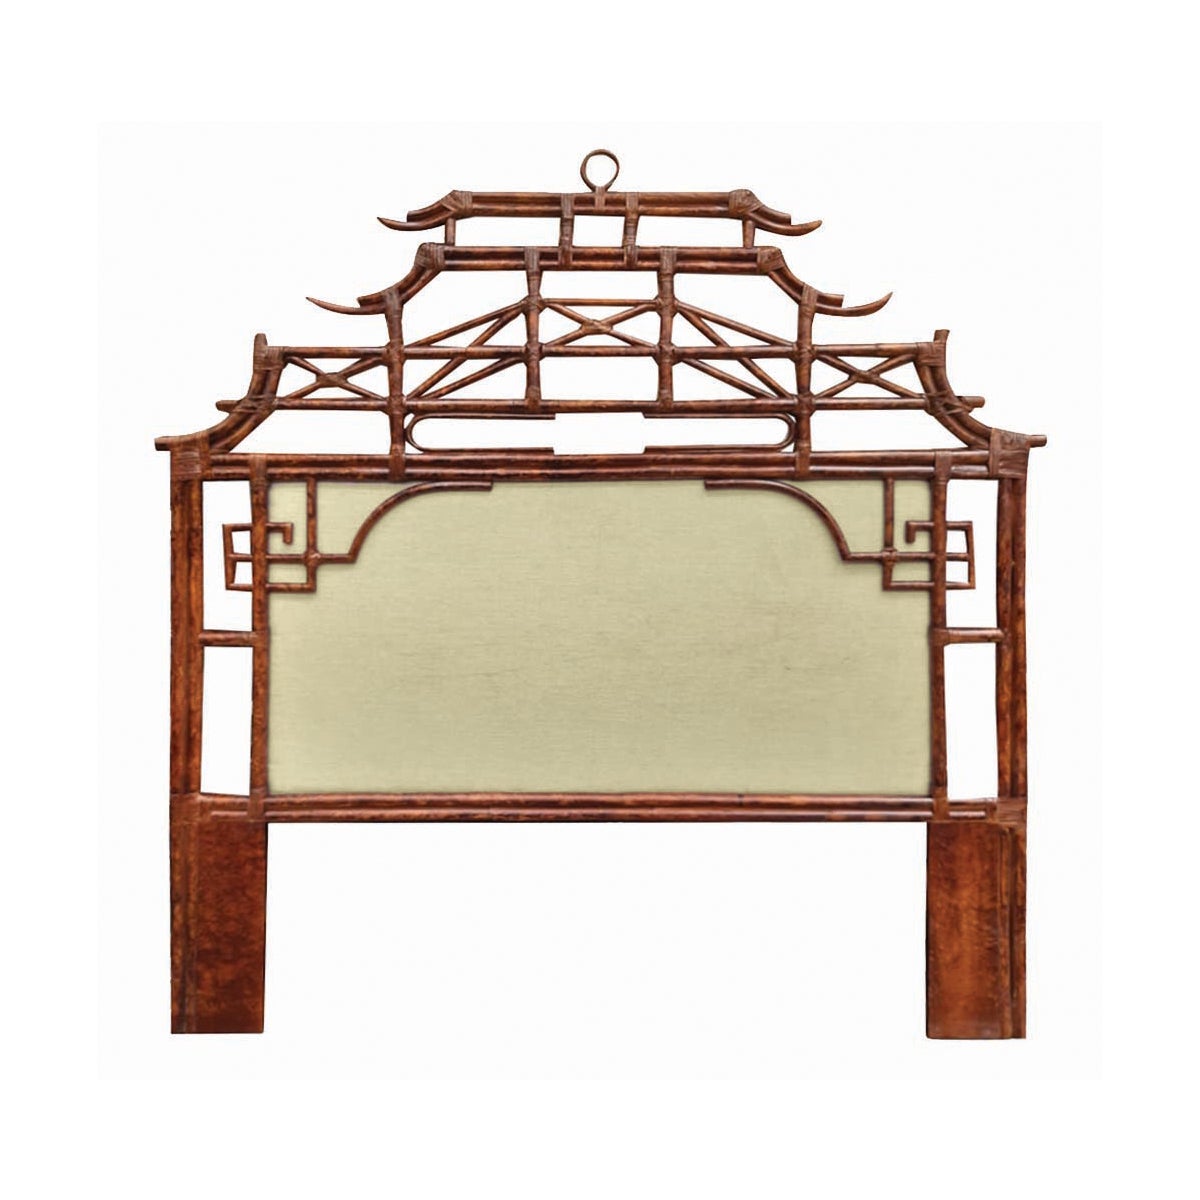 Pagoda Queen Headboard w/ Fabric Insert Frame Material - Rattan Frame Color - Tortoise Fabric Ins